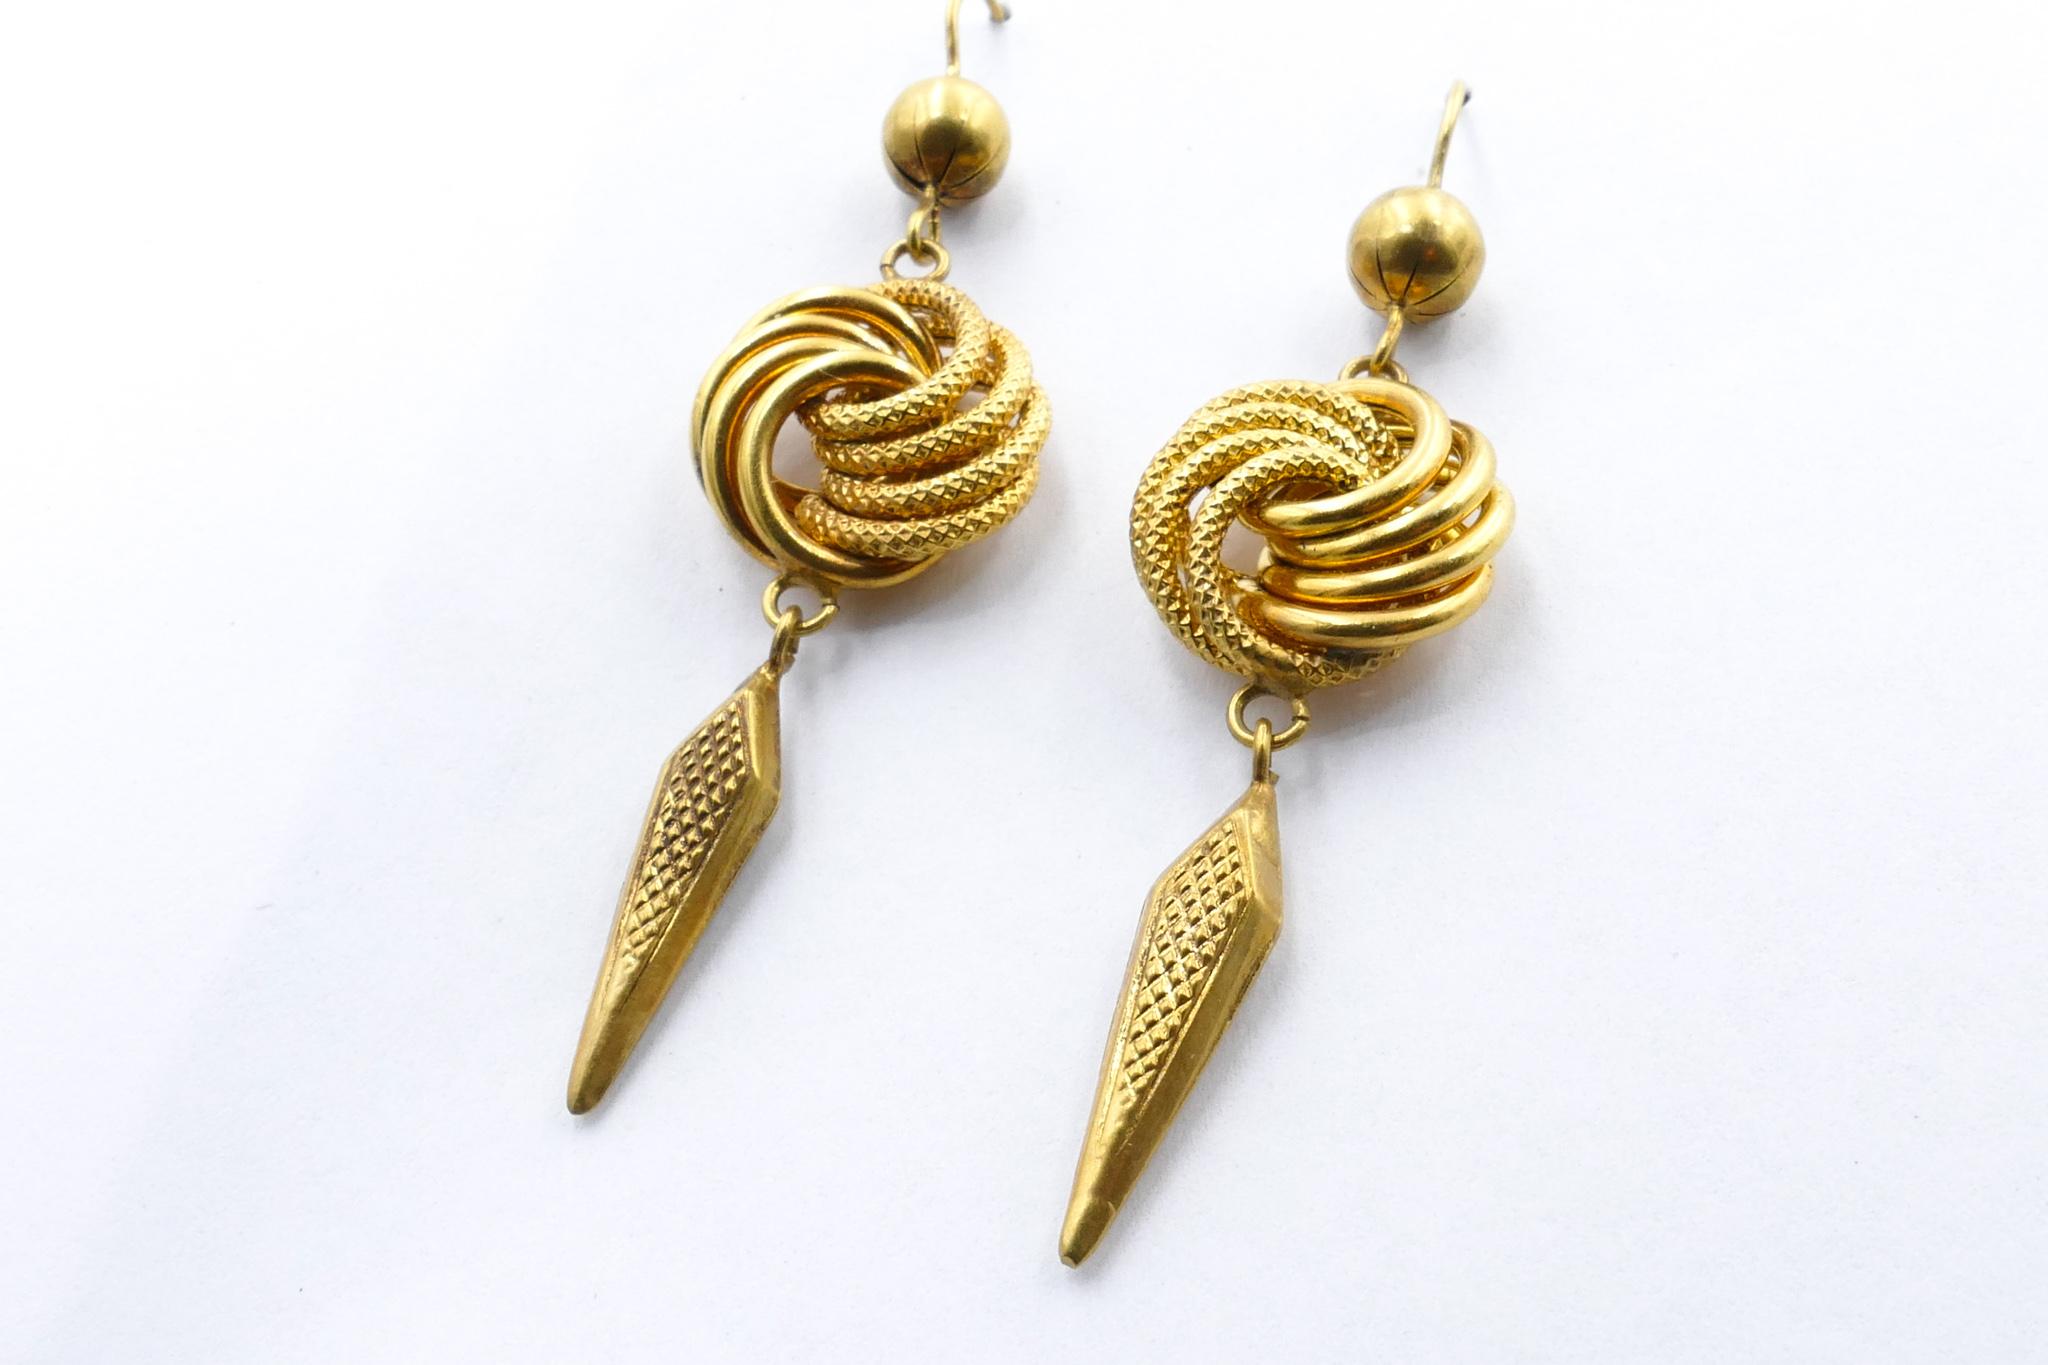 These handmade Victorian Drop Knot Earrings crafted in Yellow Gold are in excellent condition for age.
They are light on the ear & very, very wearable, even daily.
Total Weight 6.03 grams
Valuation attached.
